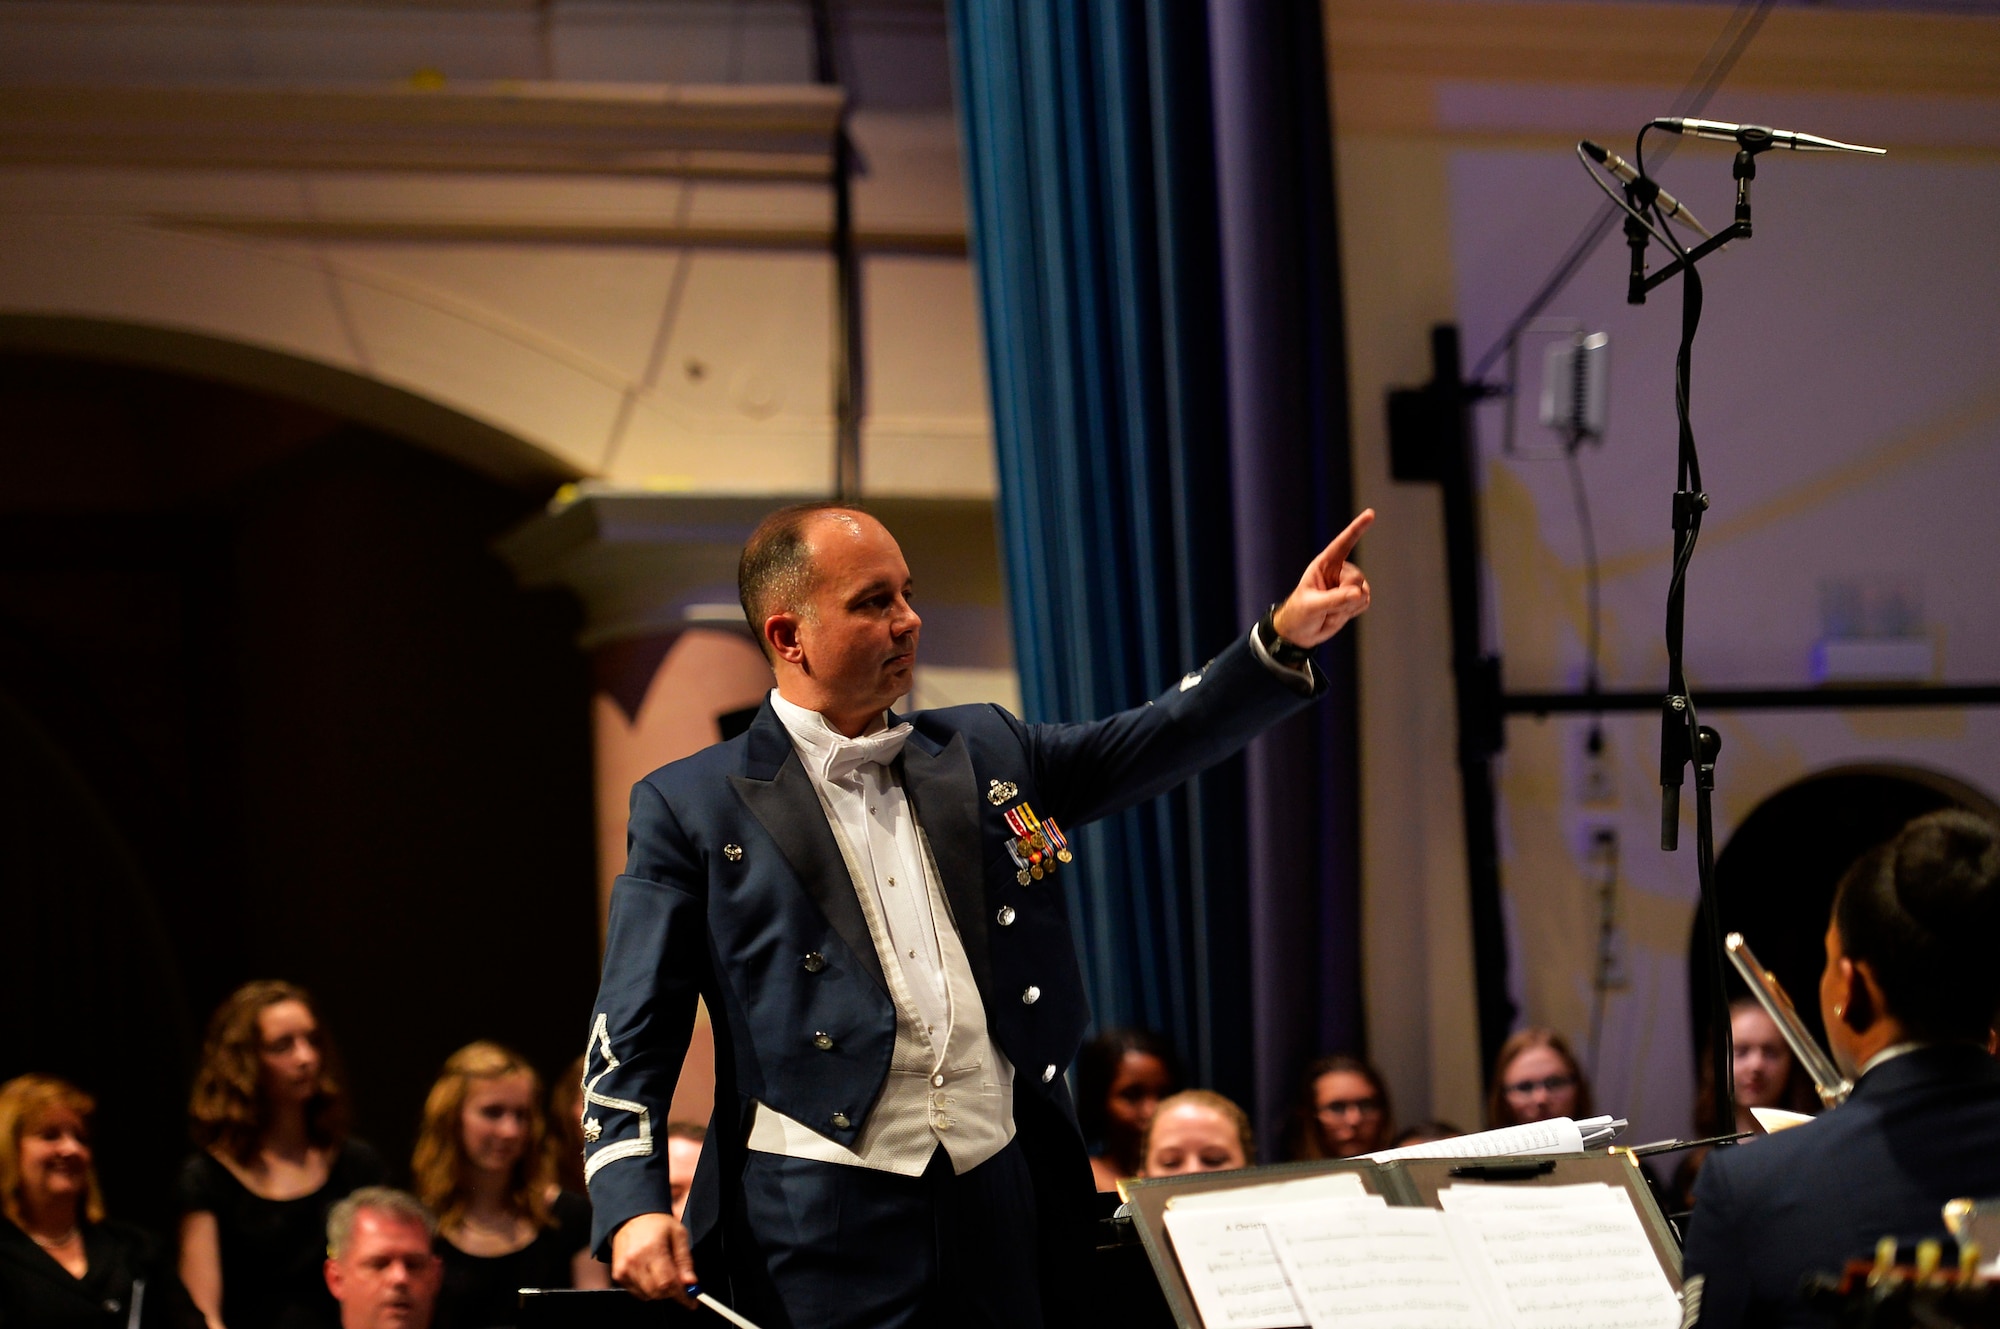 Lt. Col. Donald E. Schofield, U.S. Air Forces Europe Band conductor, conducts the USAFE Band’s Christmas performance at Kaiserslautern, Germany, Dec. 16, 2016. The performance featured not only the USAFE Band, but also German and American choirs. (U.S. Air Force photo by Airman 1st Class Joshua Magbanua)